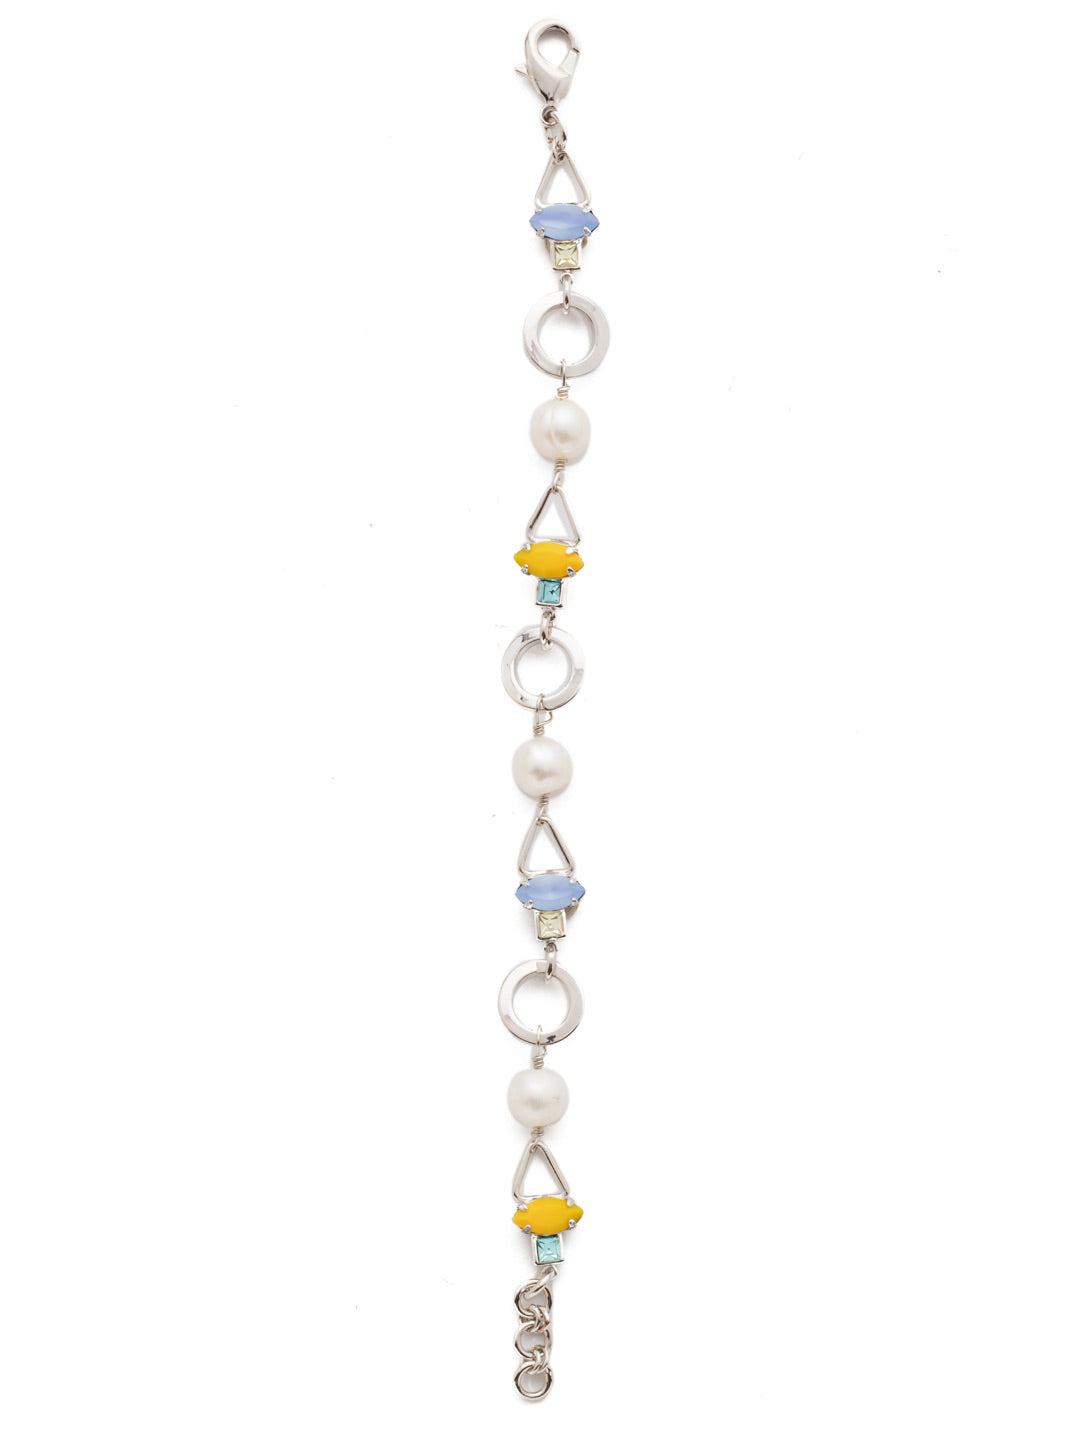 Hadley Tennis Bracelet - BEB16RHTHT - <p>A combination of pearls, petite crystals and charming geometric shapes create this modern form bracelet. Wear the Hadley Bracelet with complimenting cuffs and classic line bracelets for a signature Sorrelli stack. From Sorrelli's Tahitian Treat collection in our Palladium Silver-tone finish.</p>